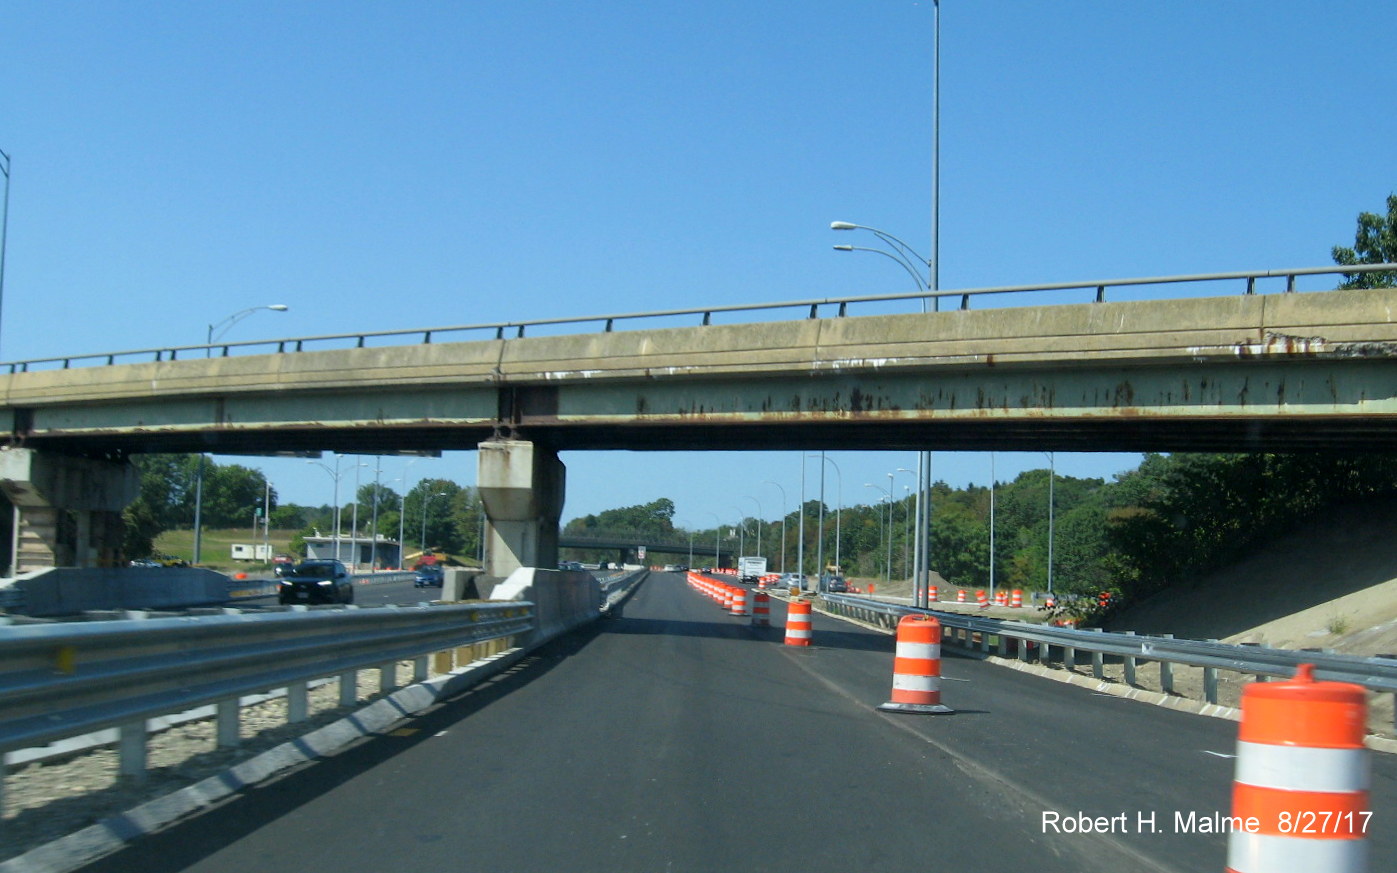 Image taken of newly paved ramp to I-90 West from I-95 North in Weston